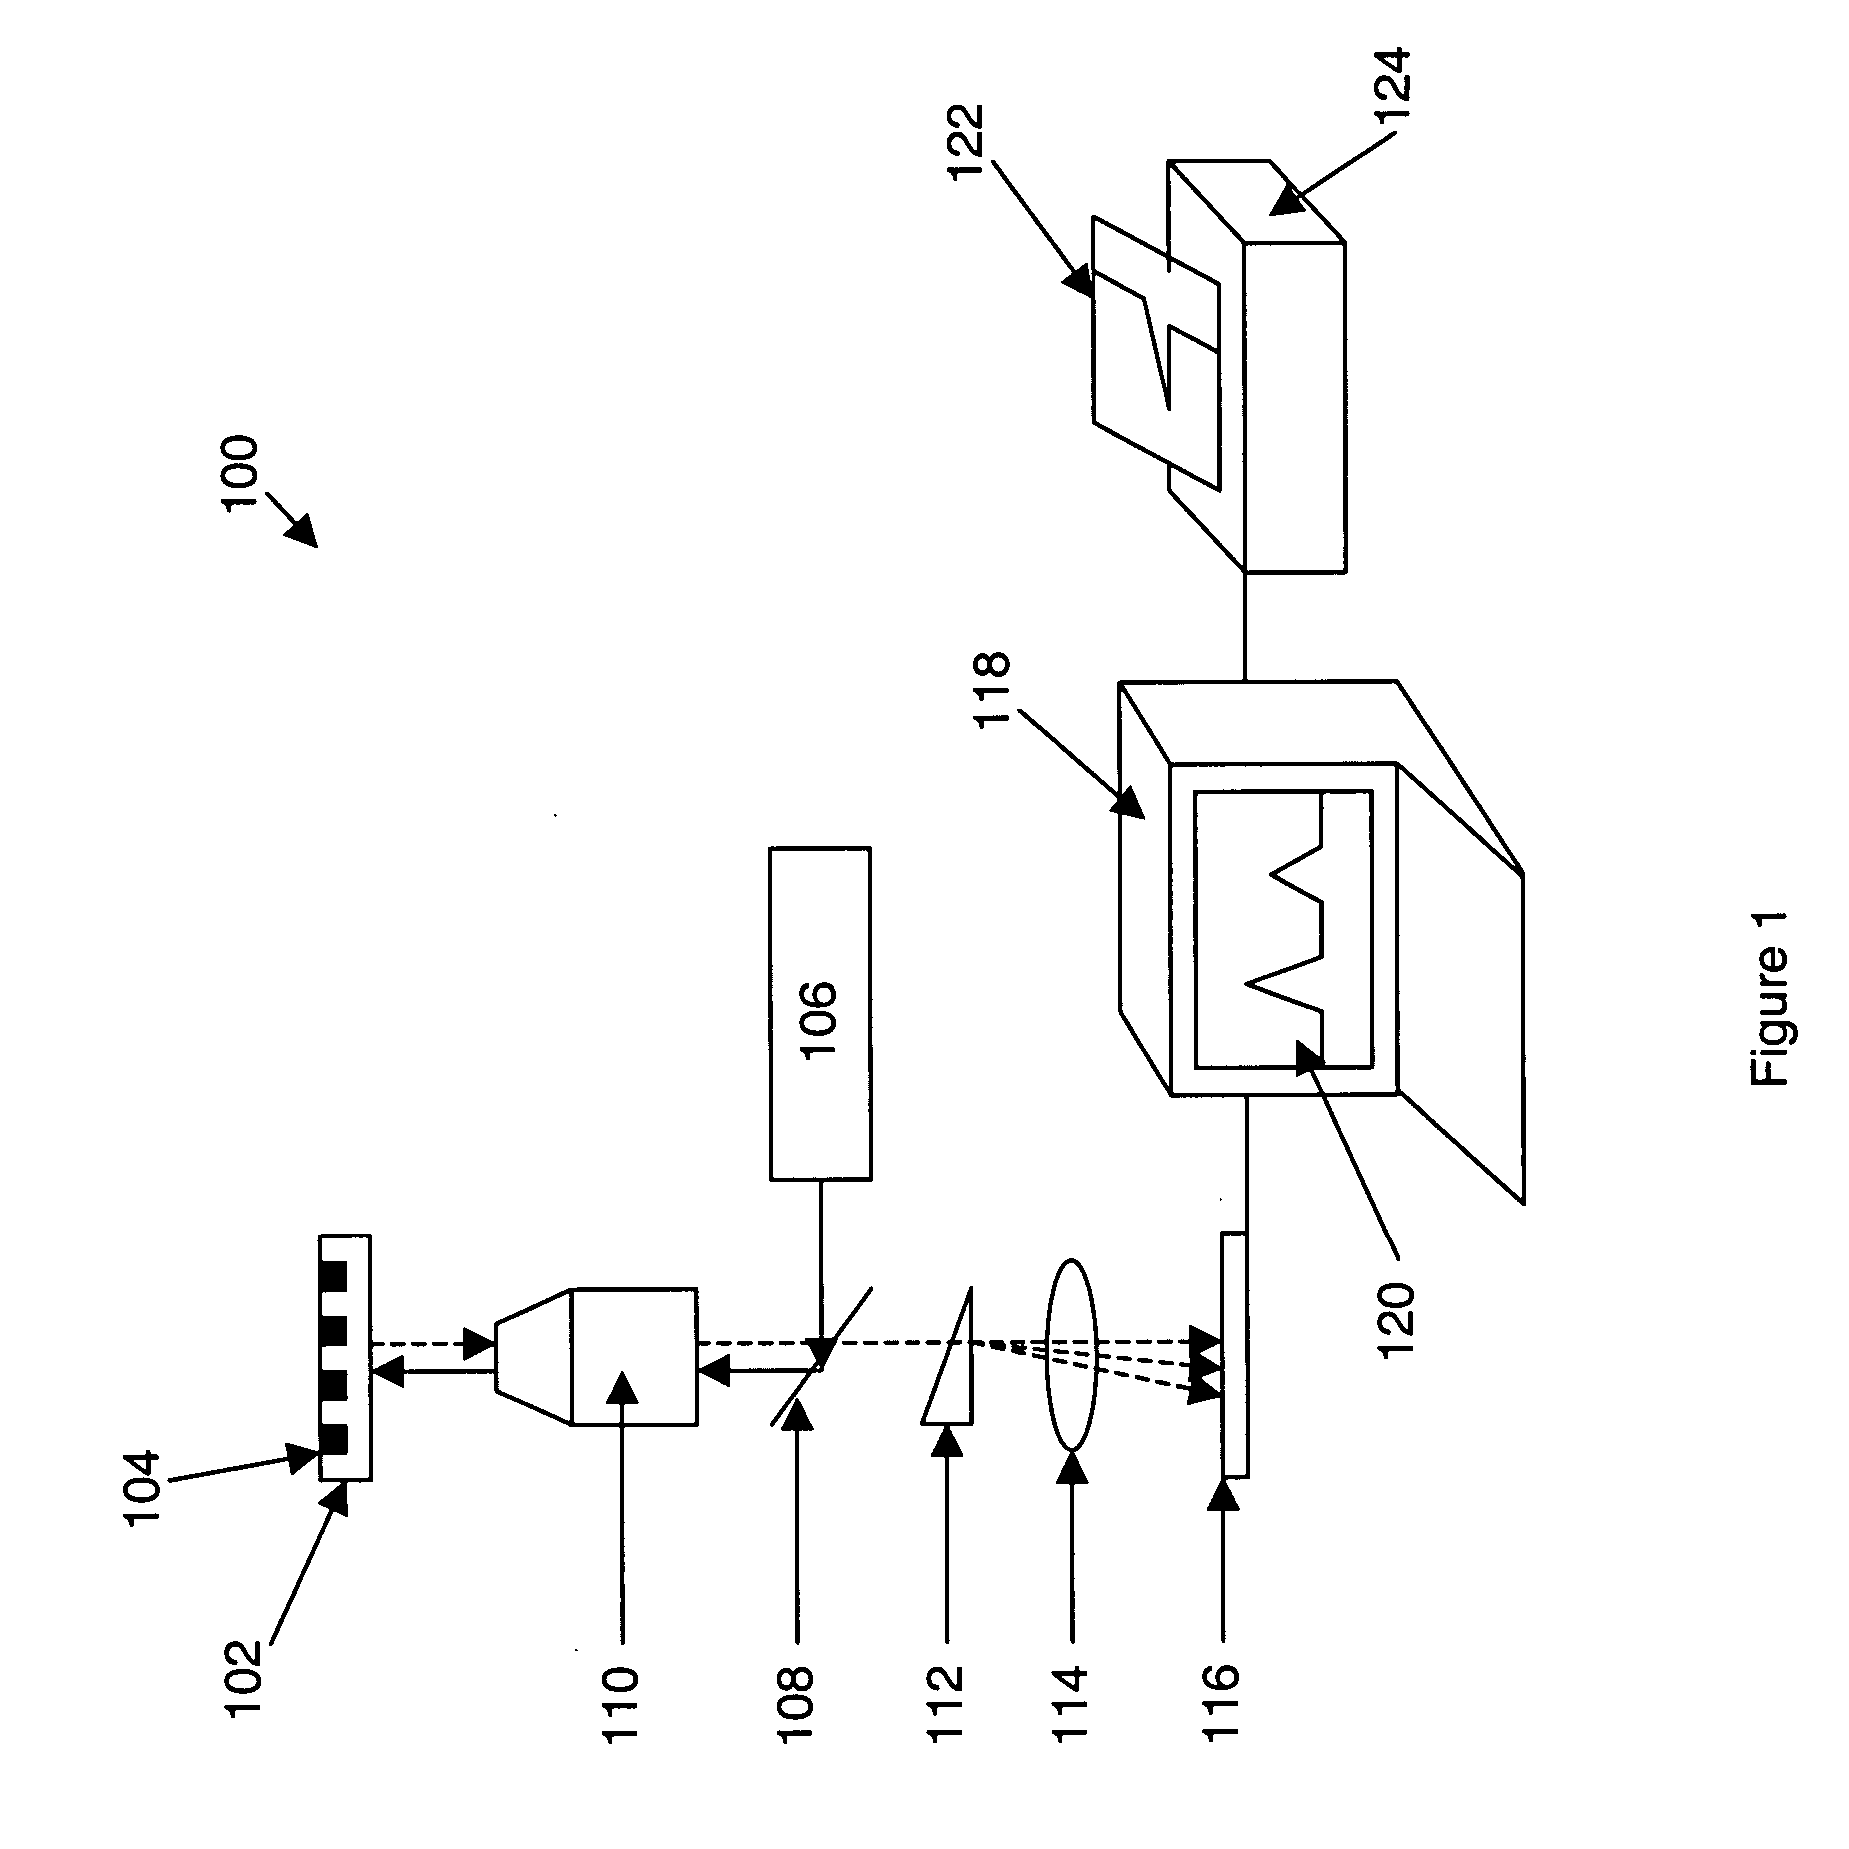 Methods and systems for simultaneous real-time monitoring of optical signals from multiple sources